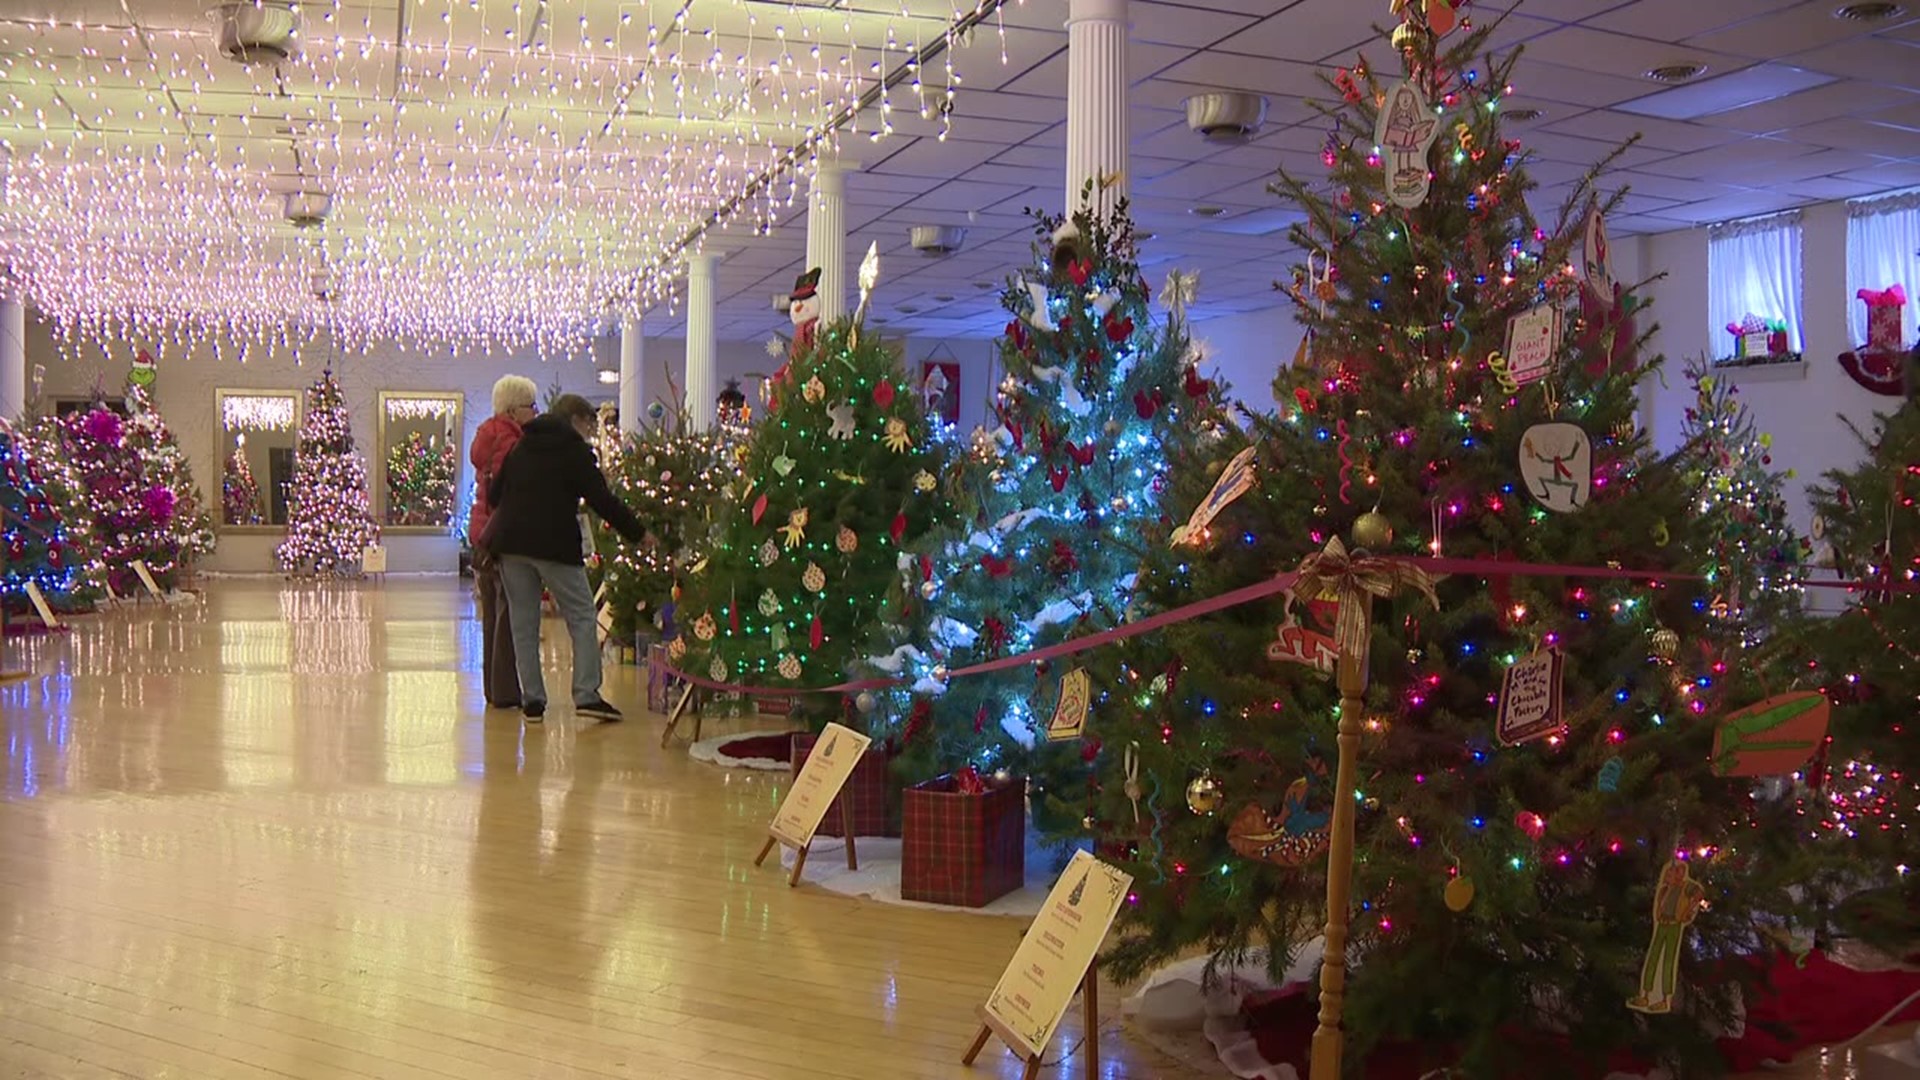 If you enjoy seeing Christmas trees, you may want to take a trip to Bloomsburg in the coming days for TreeFest.